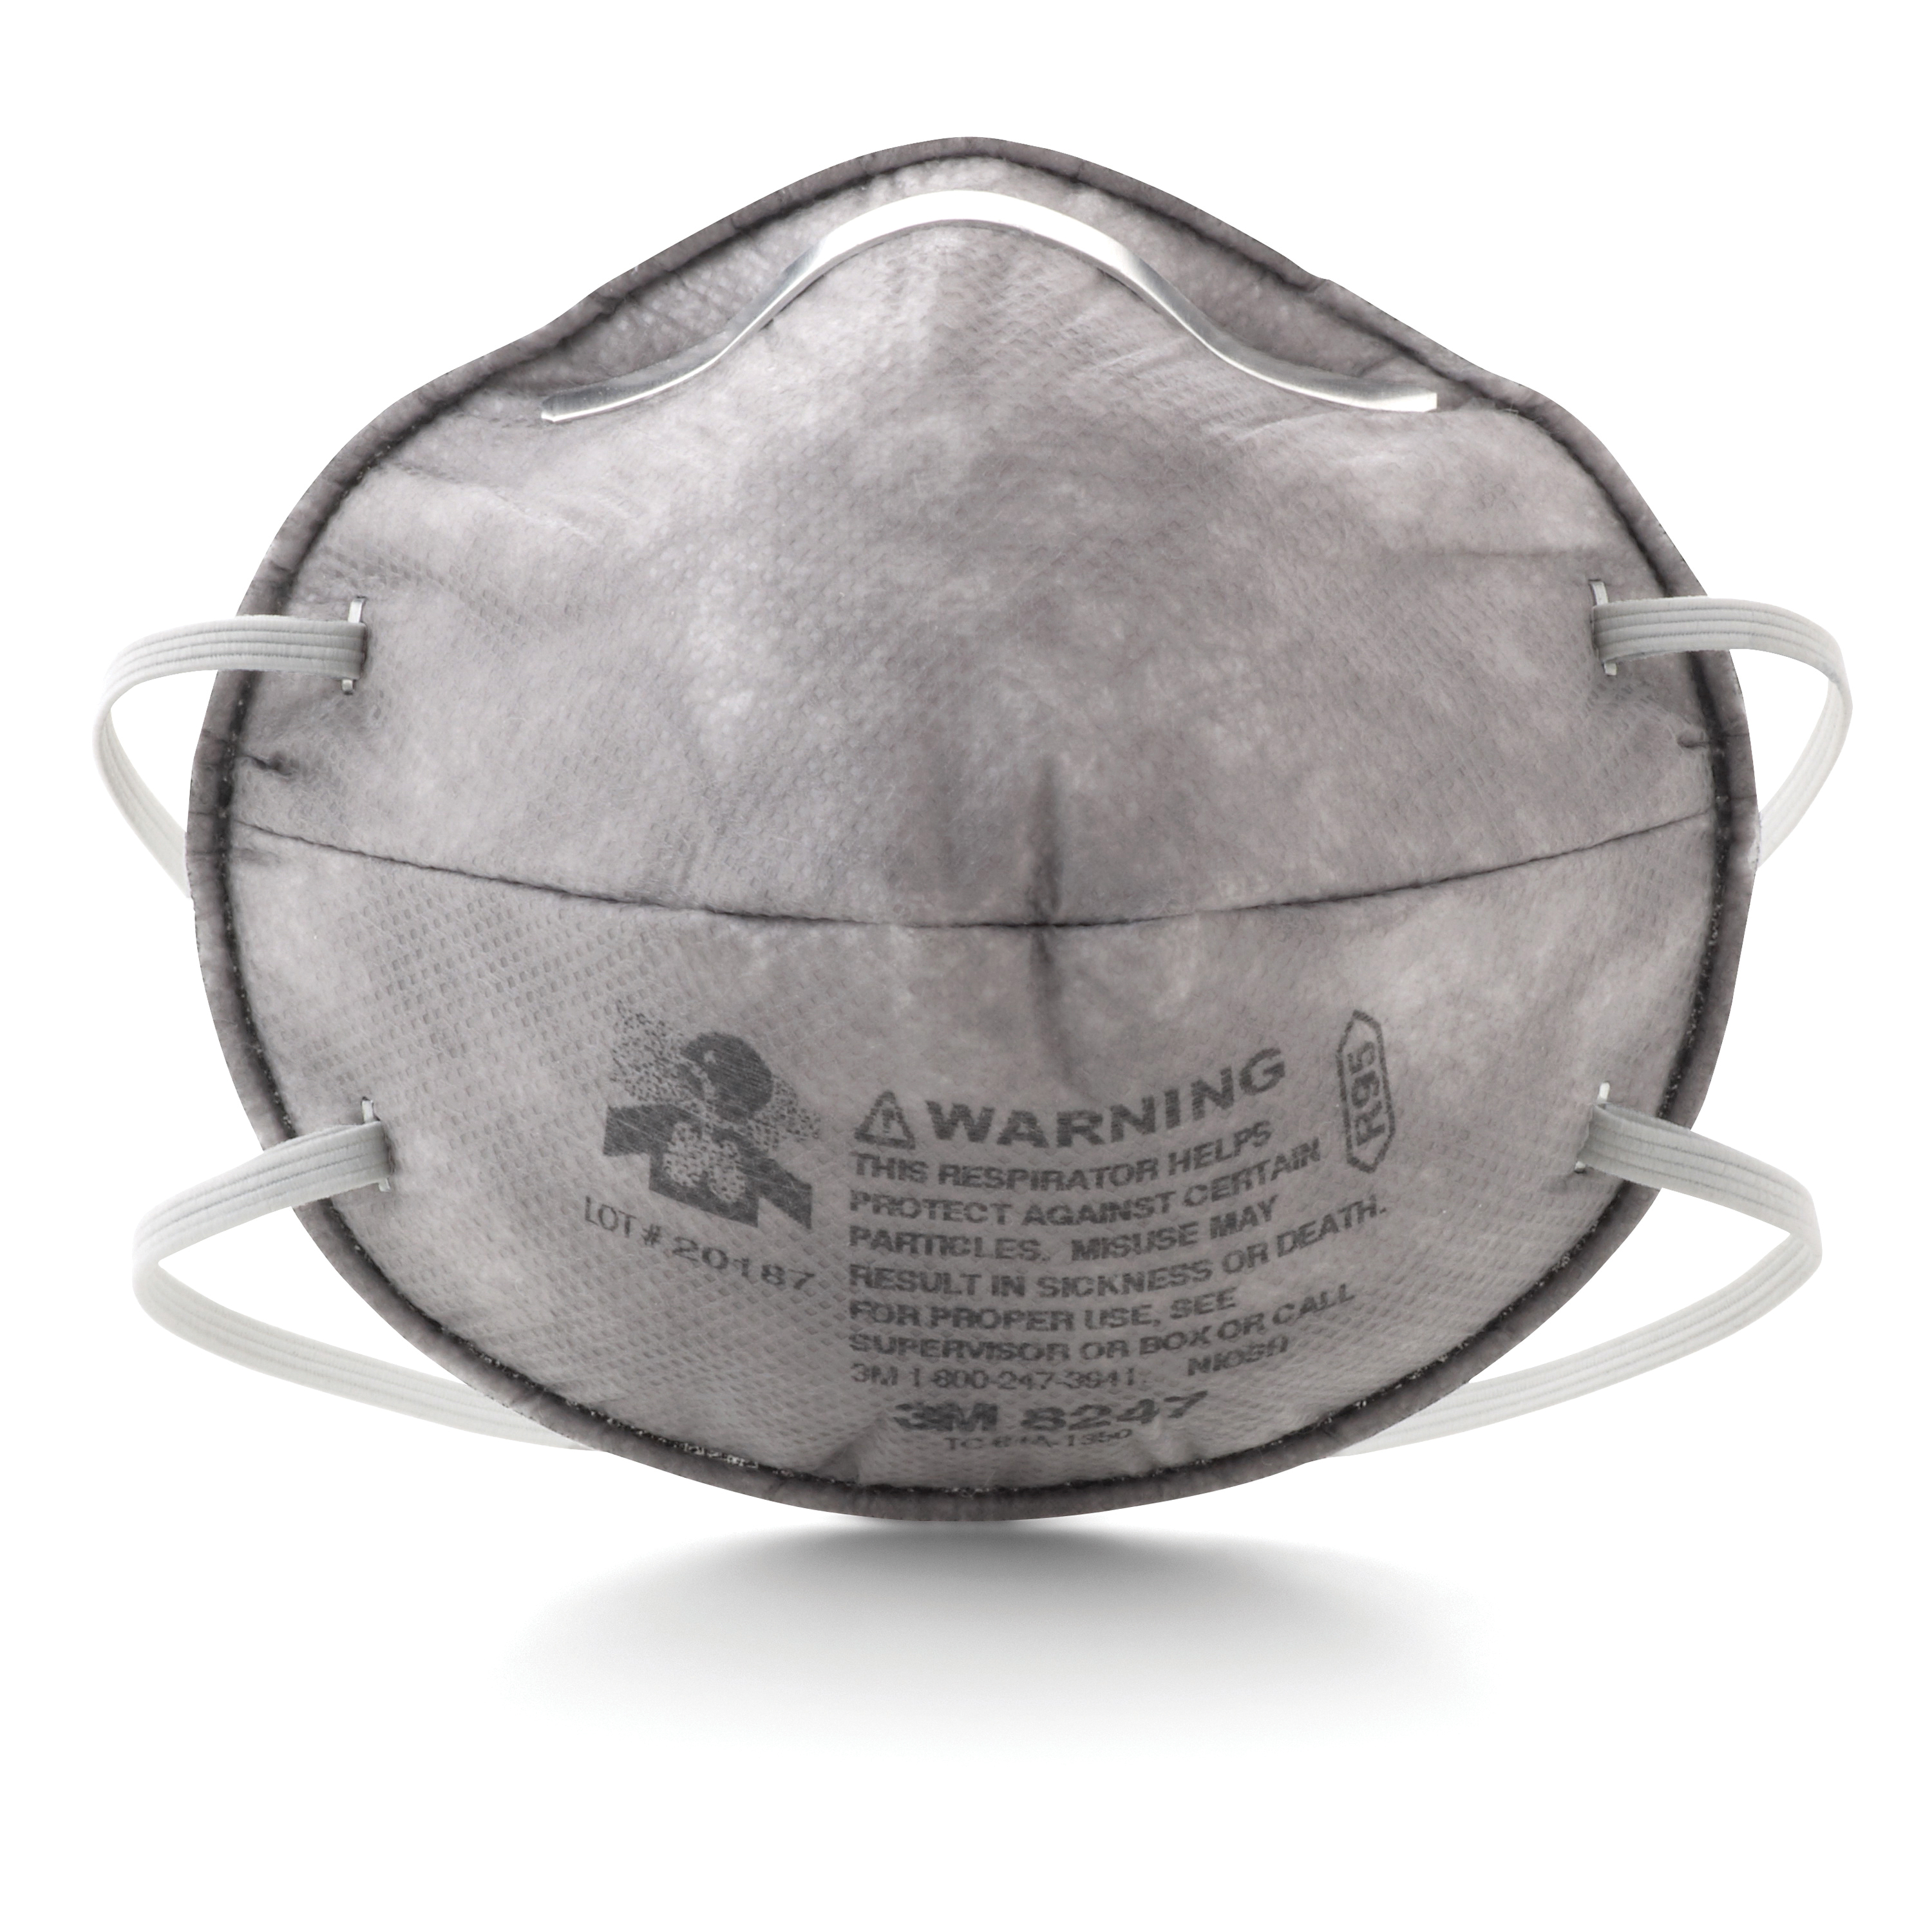 3M™ 051138-54343 8511 Cup Style Disposable Particulate Respirator With Cool Flow™ Exhalation Valve and Adjustable M-Nose Clip, Standard, Resists: Airborne Biological Particles, Certain Oil, Non-Oil Based Particles, Dust and other Particles